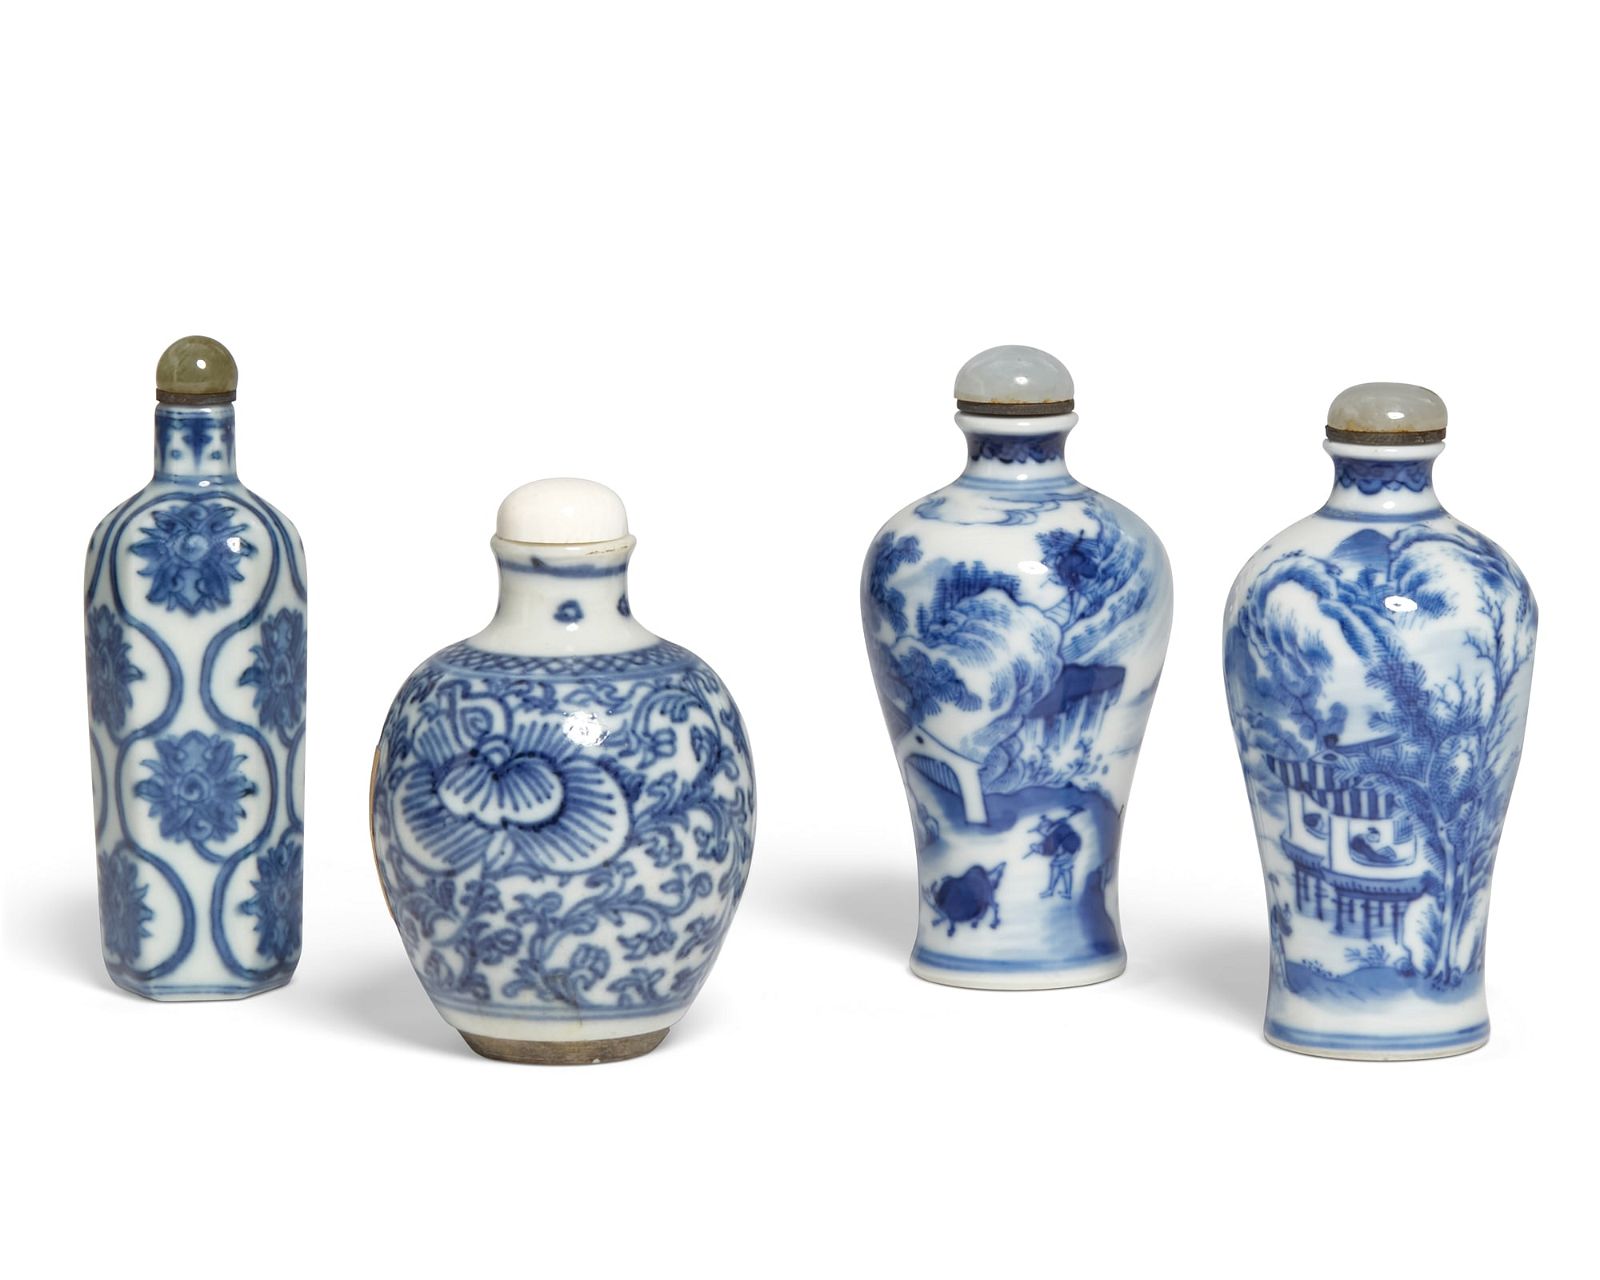 FOUR CHINESE PORCELAIN SNUFF BOTTLESFour